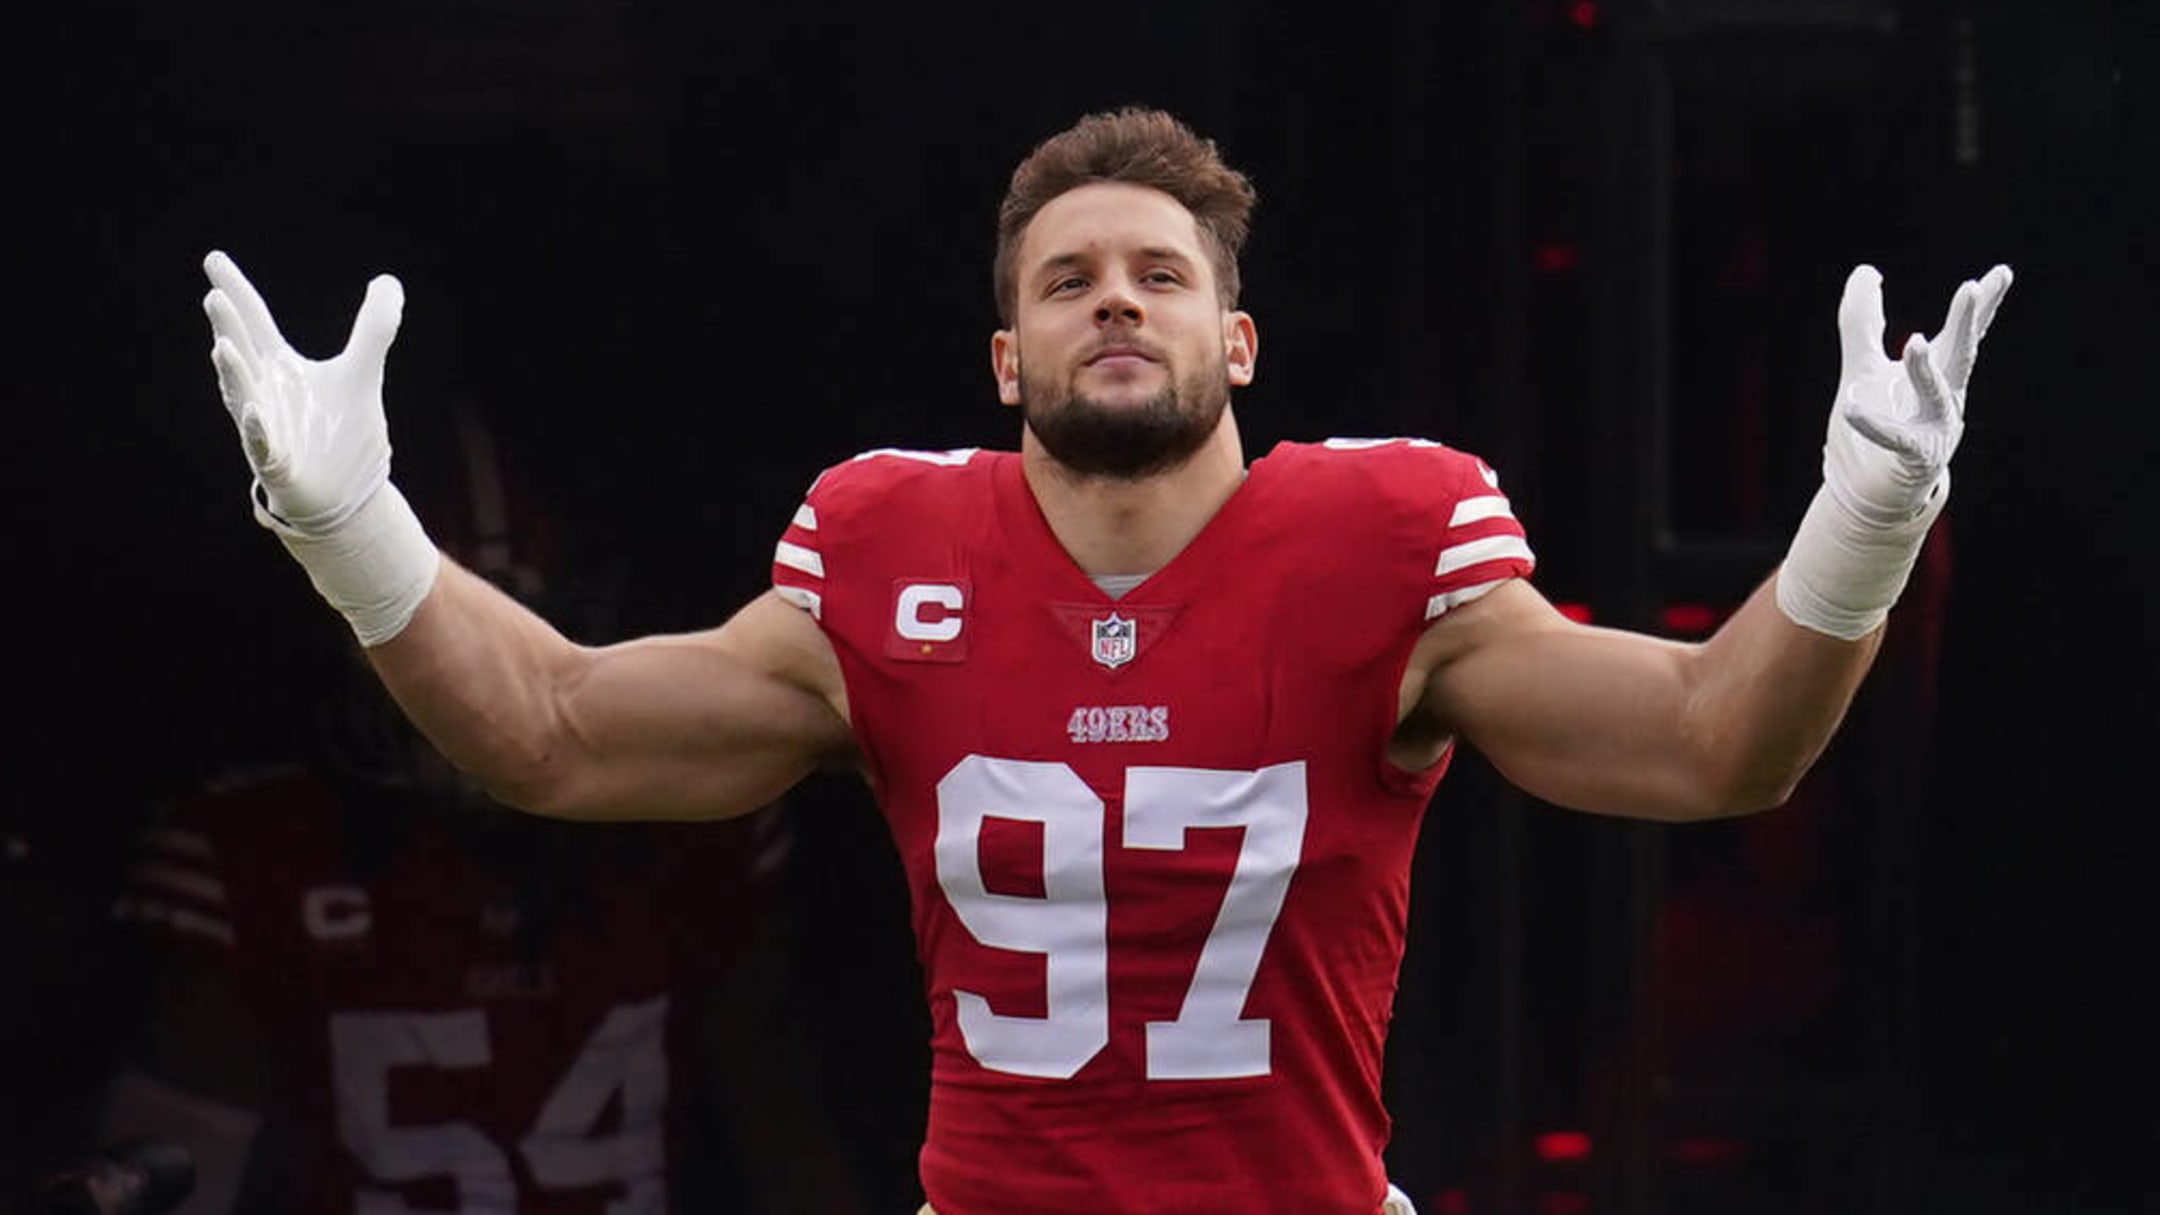 San Francisco 49ers - Never a doubt ¯\_(ツ)_/¯ Nick Bosa is the AP Defensive  Player of the Year!